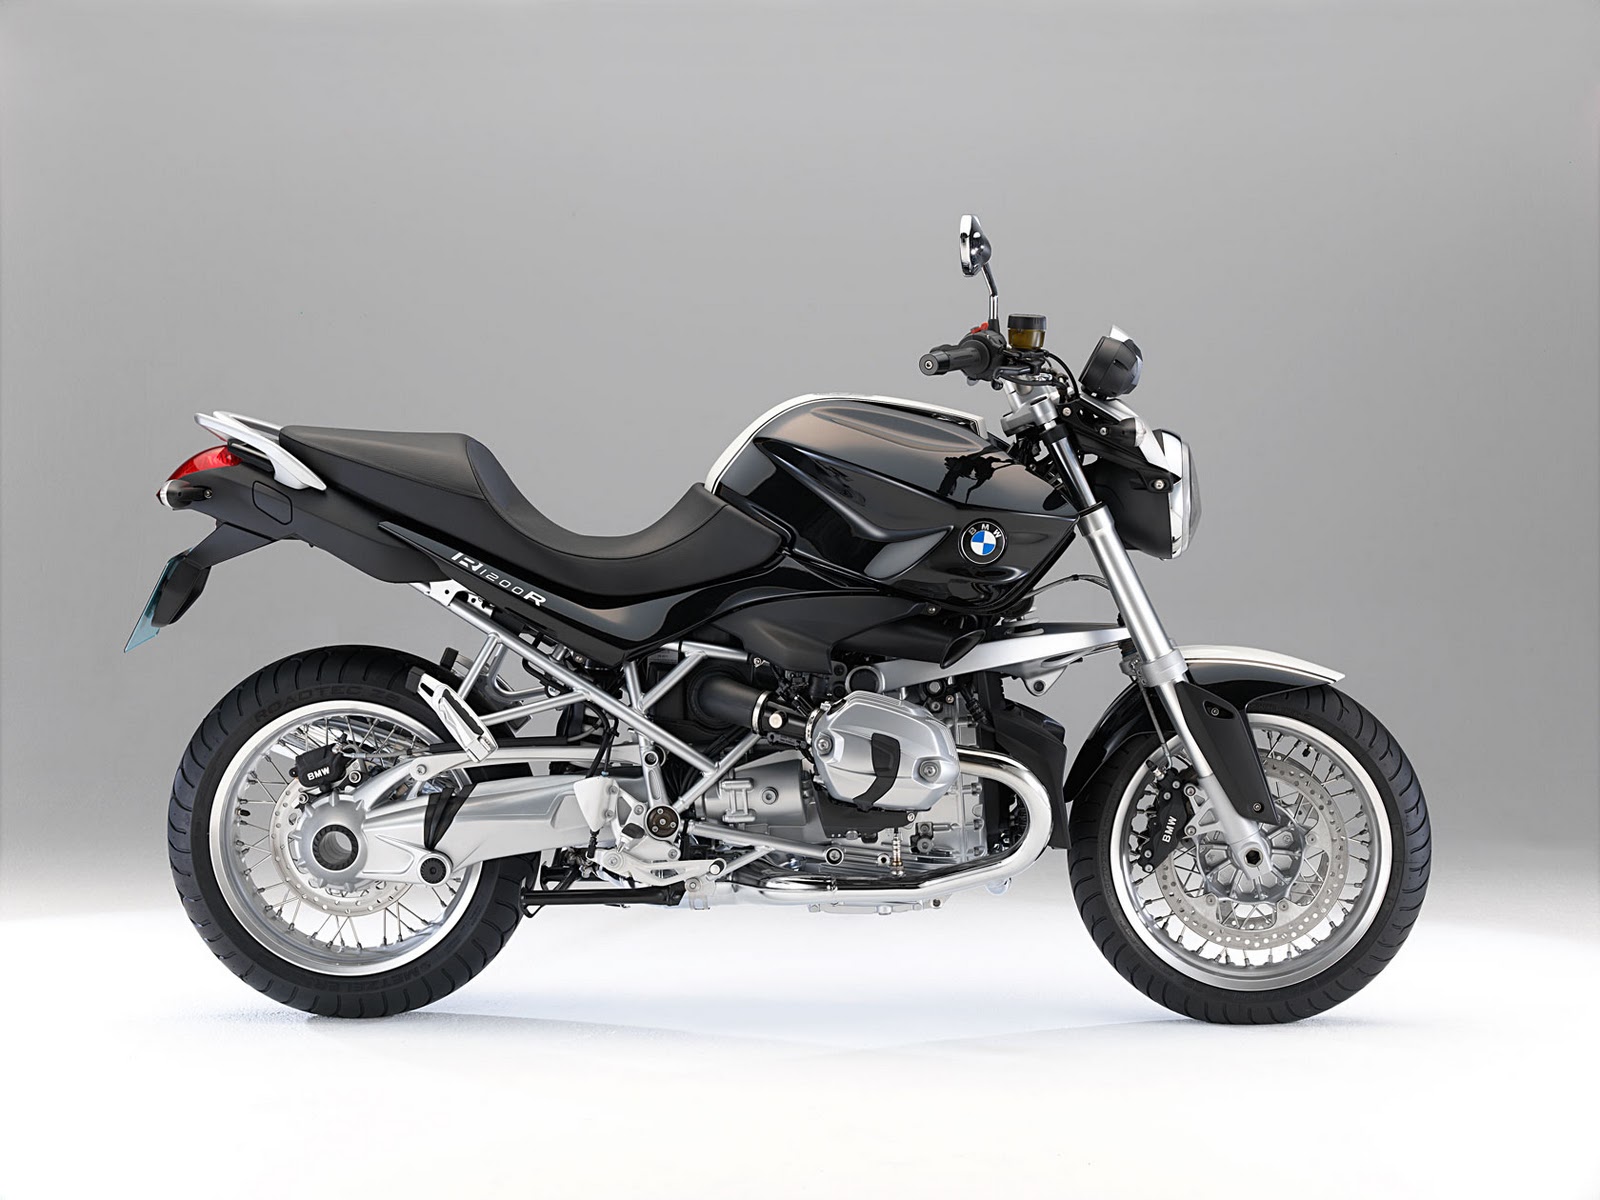 BMW Motorcycle Pictures: BMW R1200R Classic